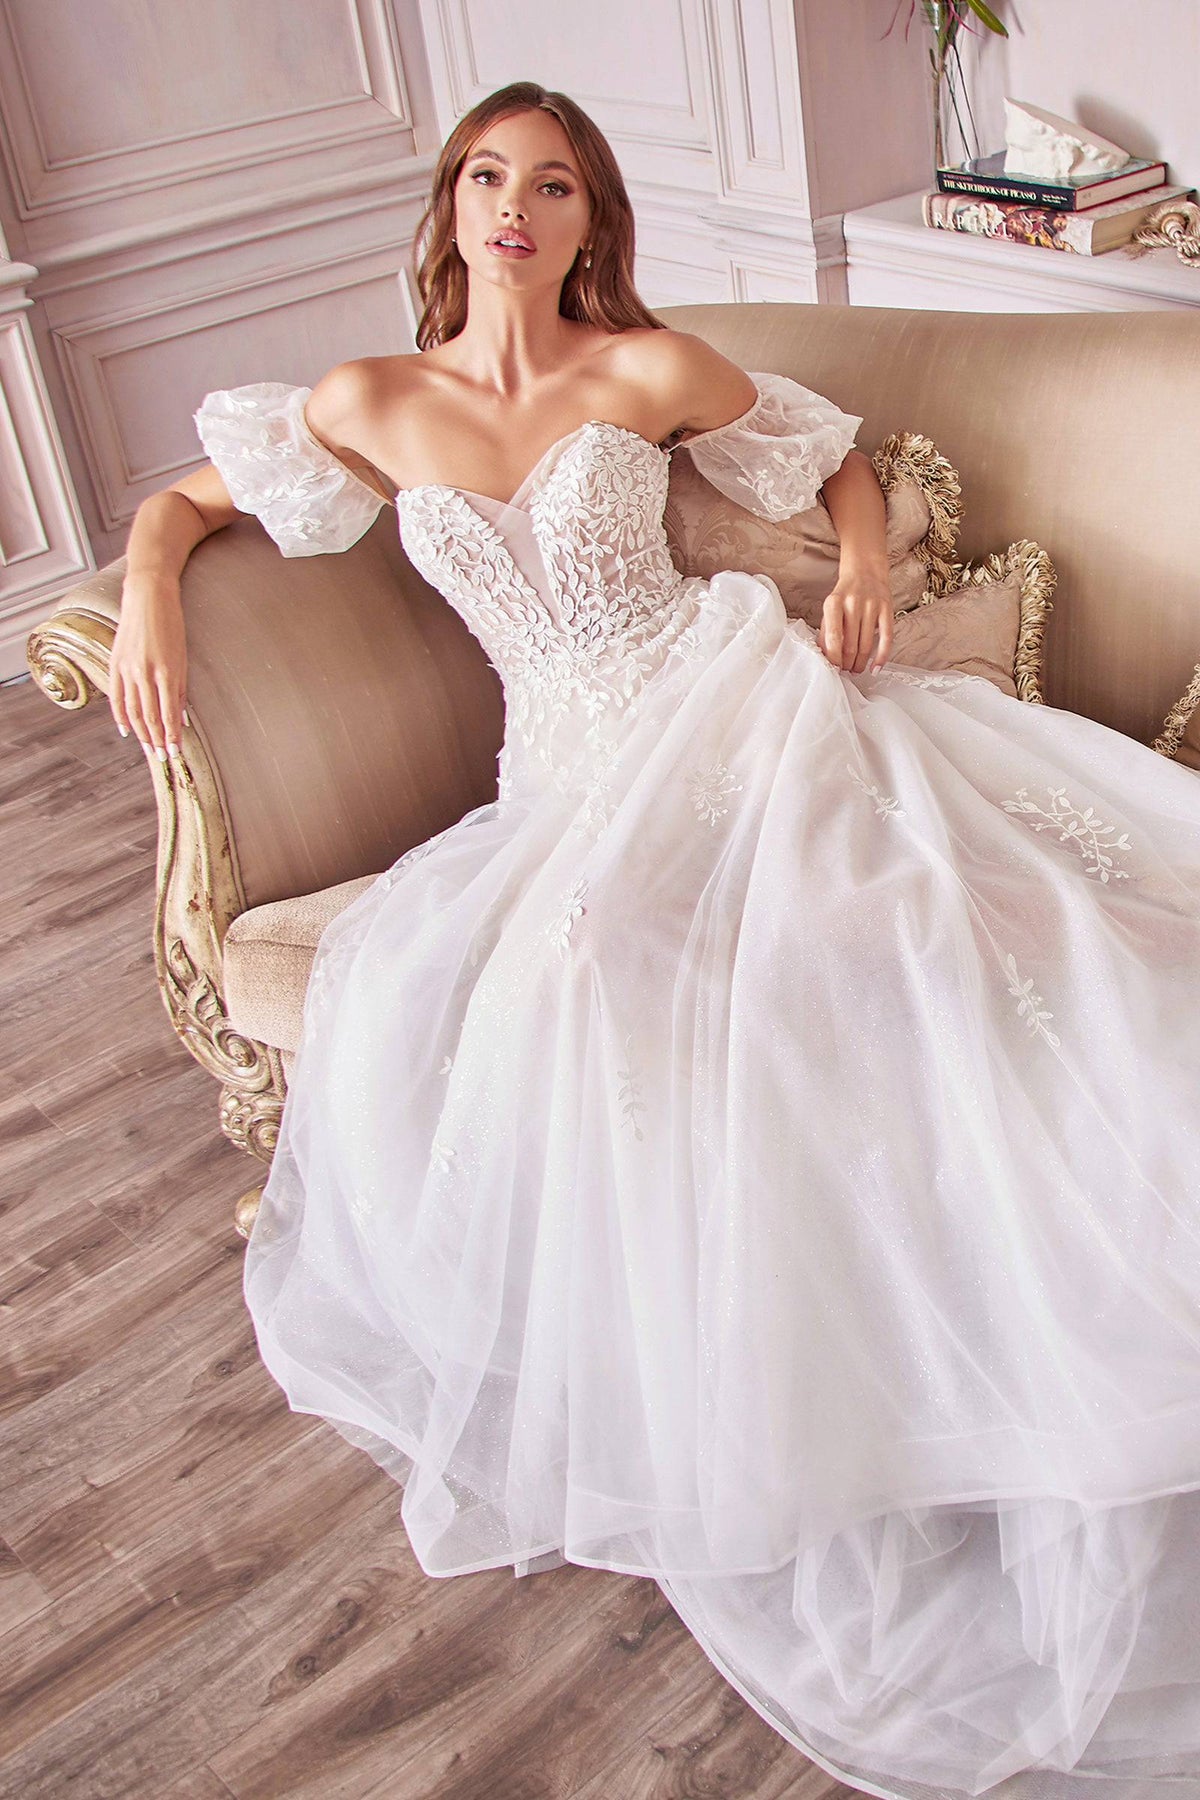 Luxe A1014 Off Shoulder Floral Lace Wedding Gown with Flowing Train - Norma Reed - NORMA REED